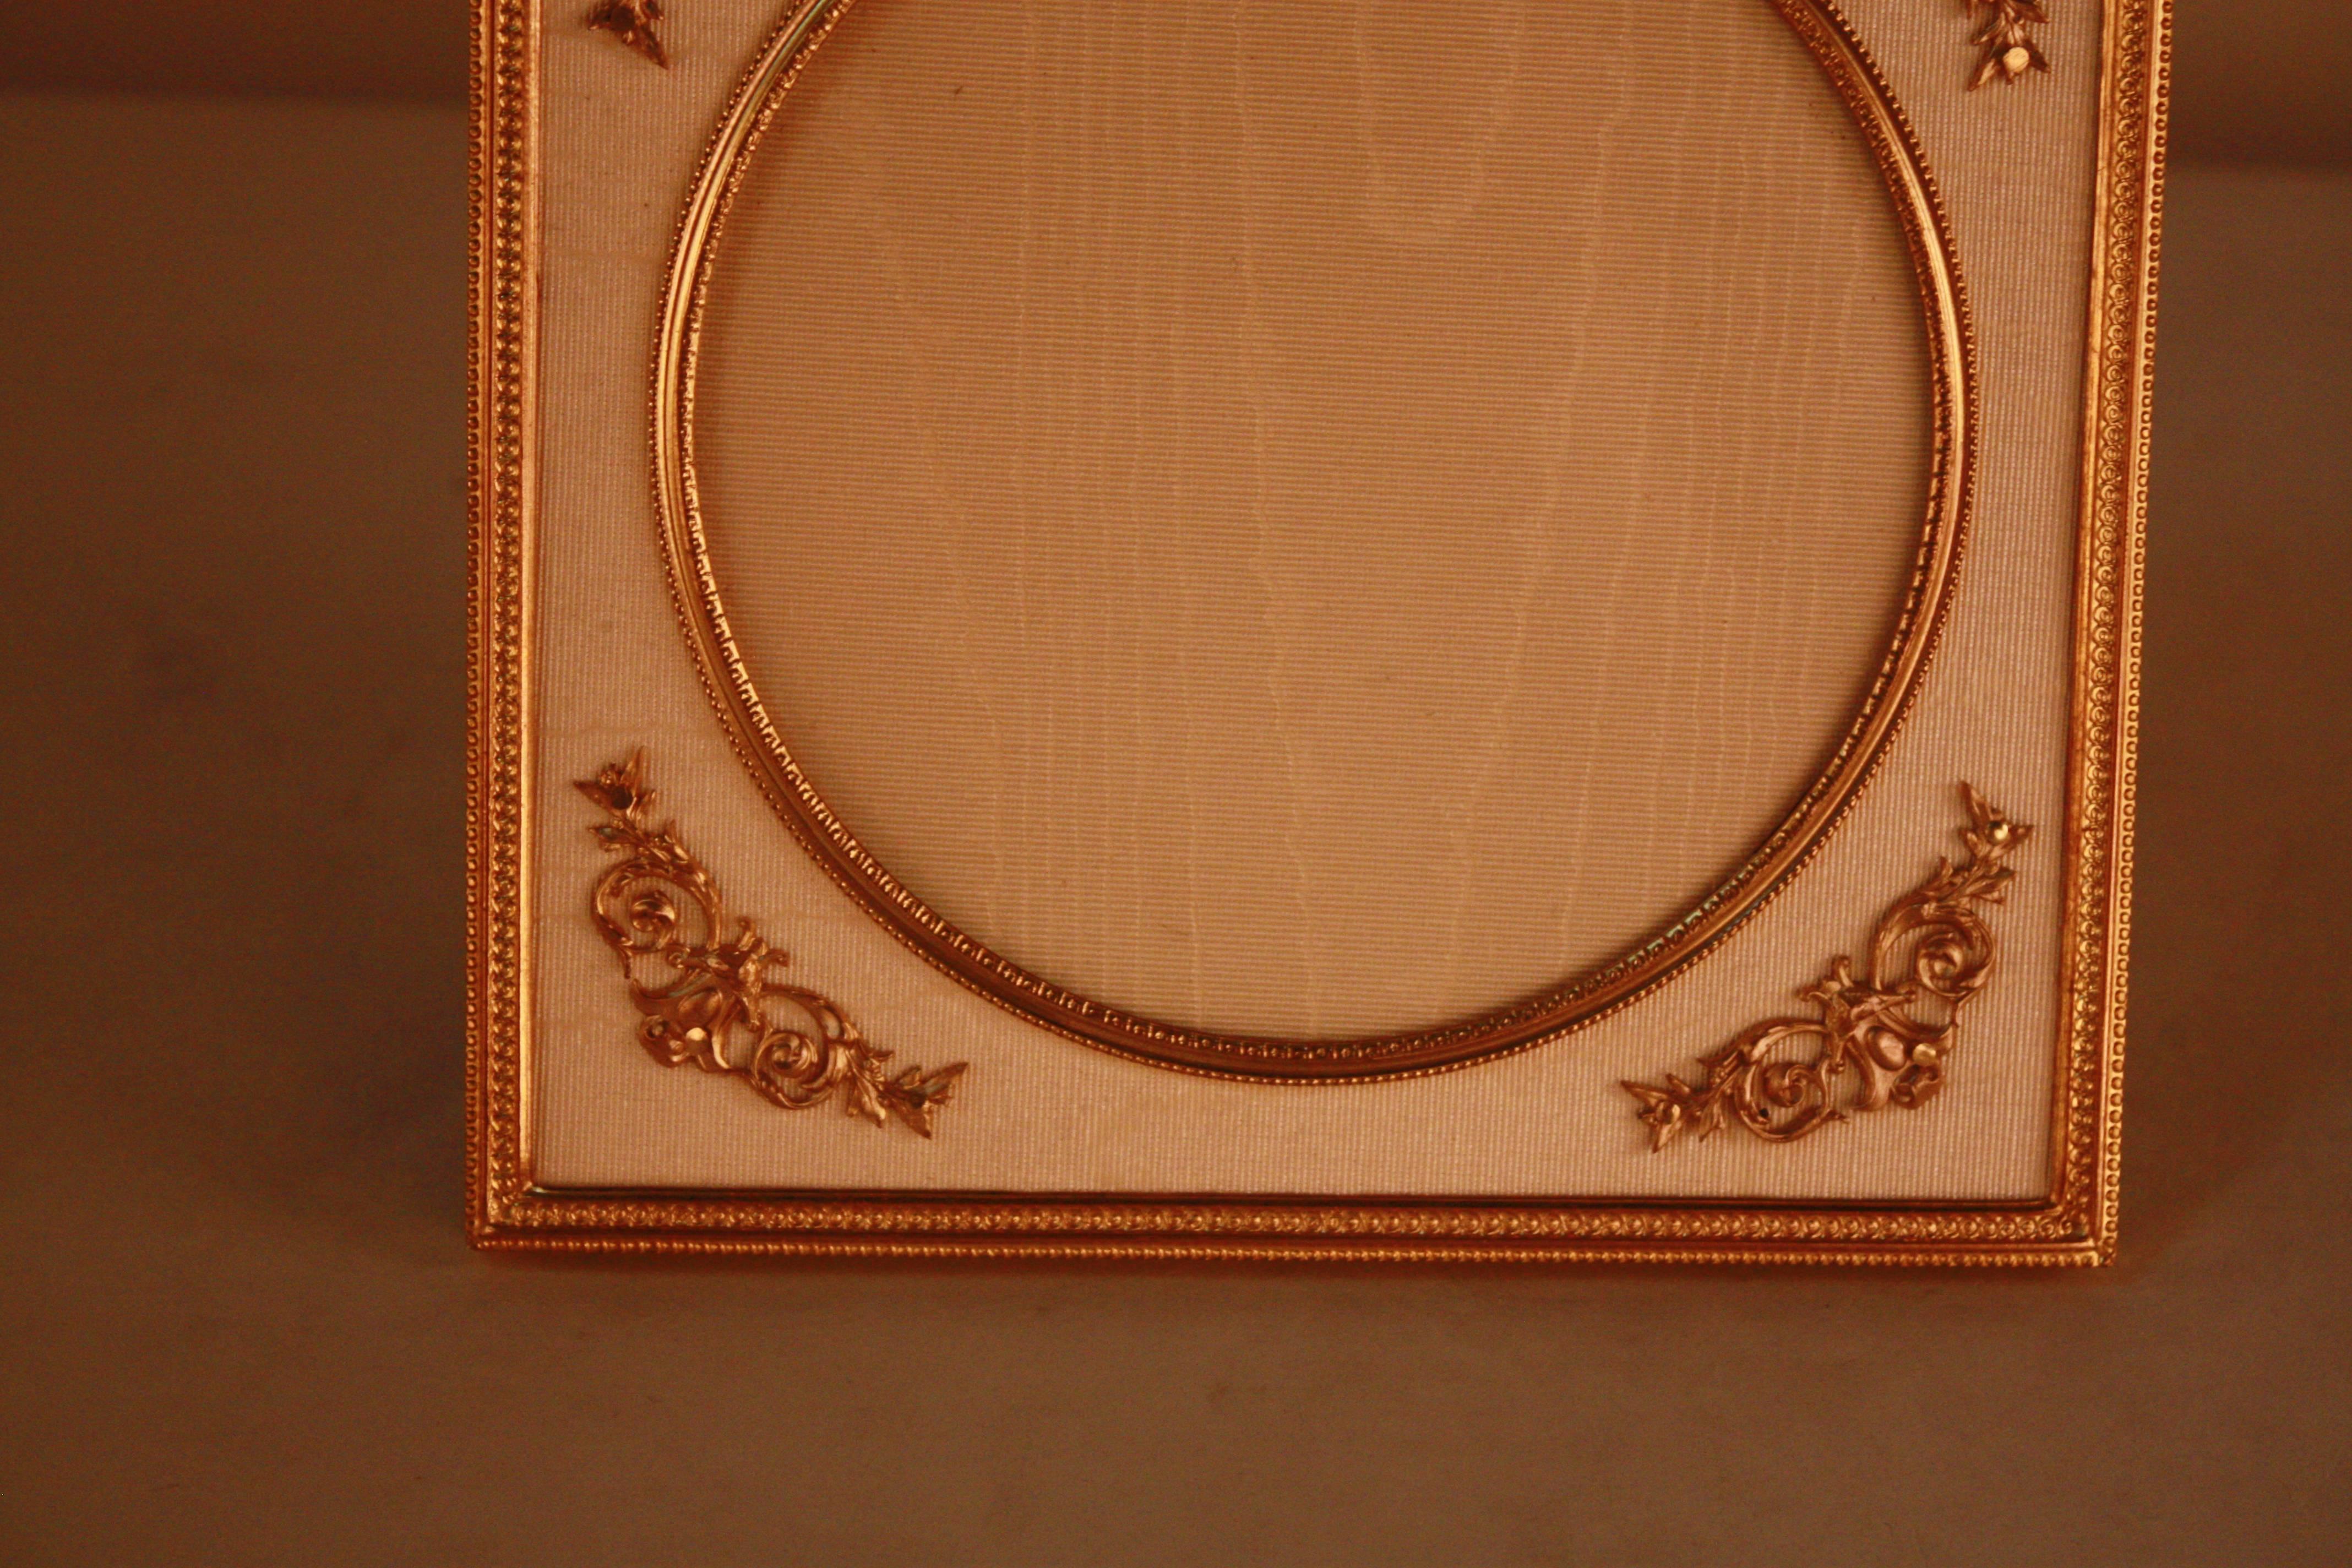 A rare 19th century French Empire gilded bronze picture frame, featuring a bow at the top. A playful piece with a warm color. 
Circular space for an image, with a 4.5